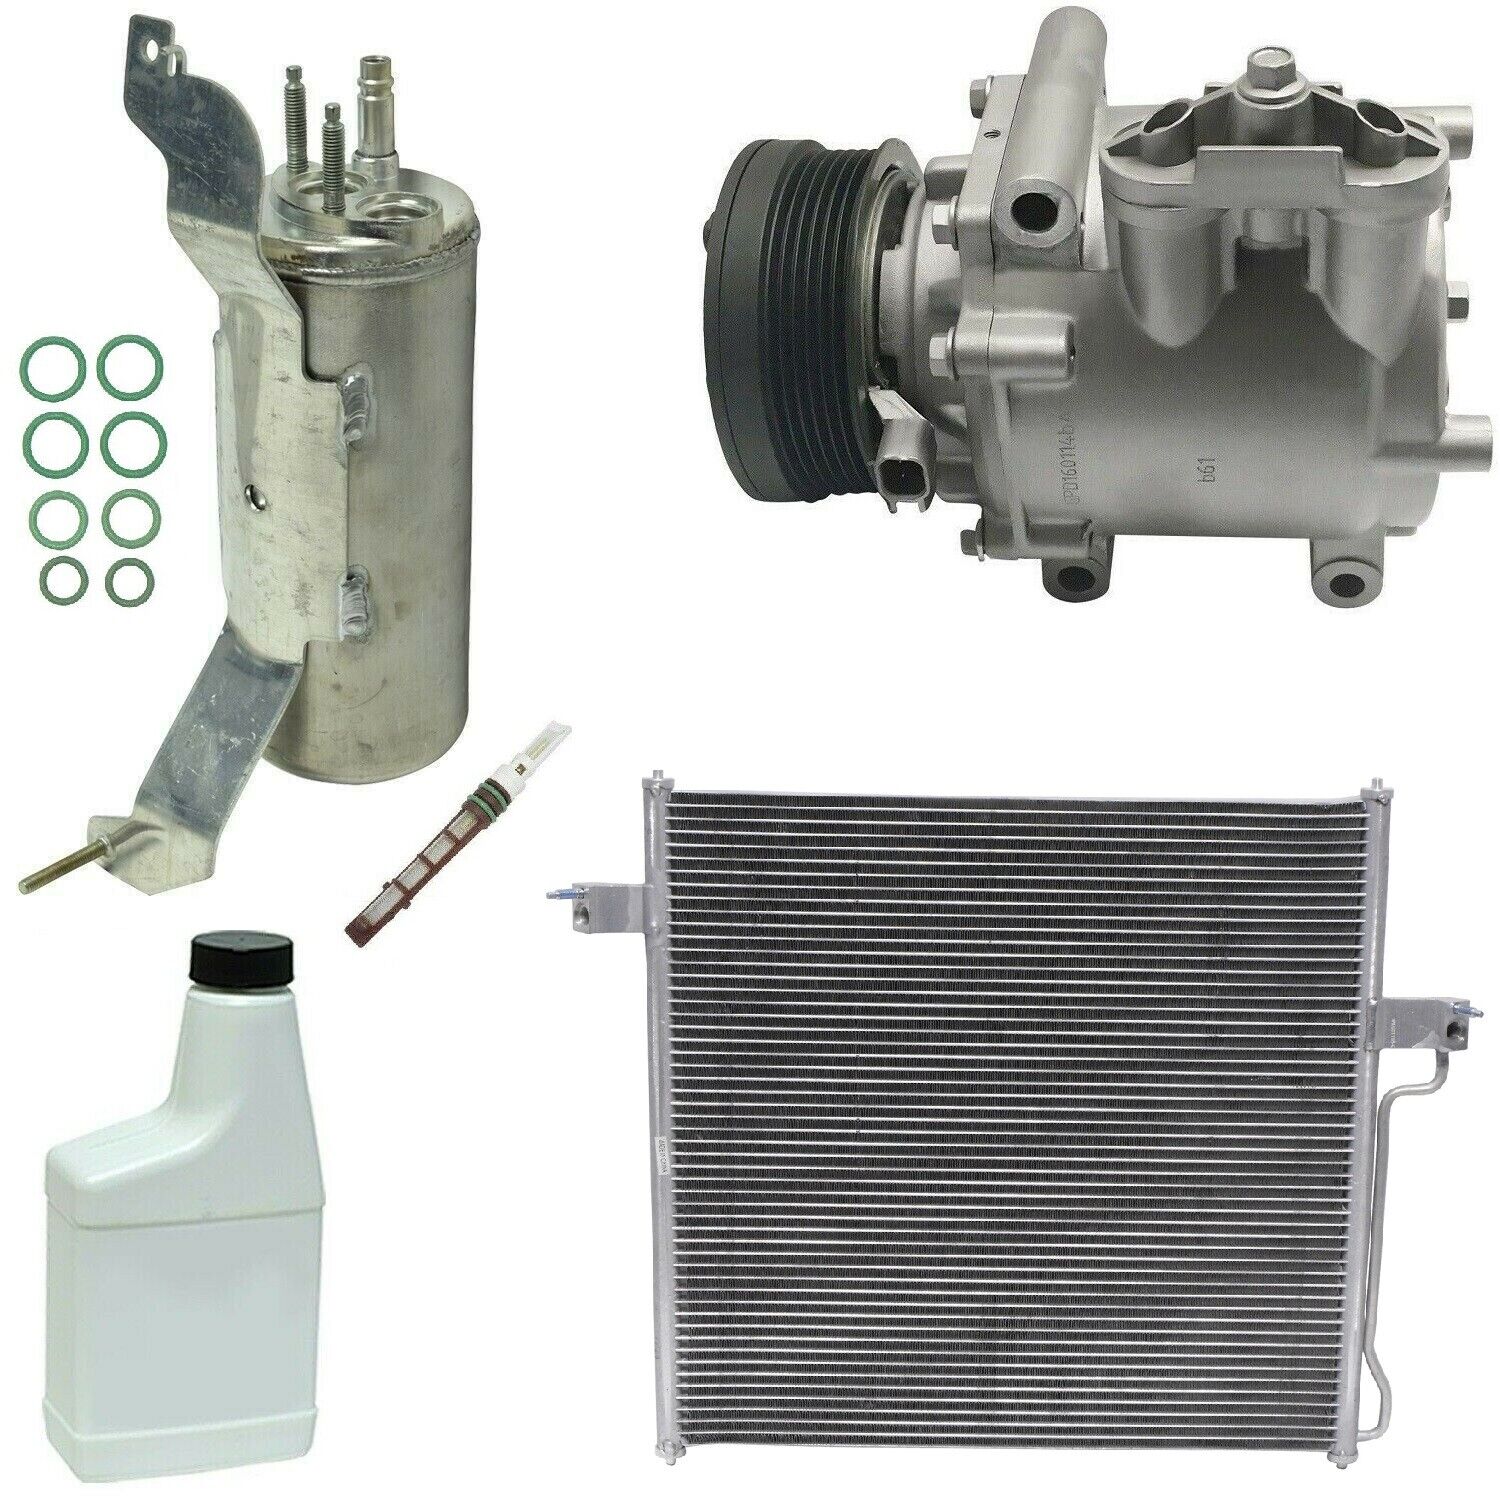 RYC Remanufactured Complete AC Compressor Kit AB49 (GG542) With Condenser